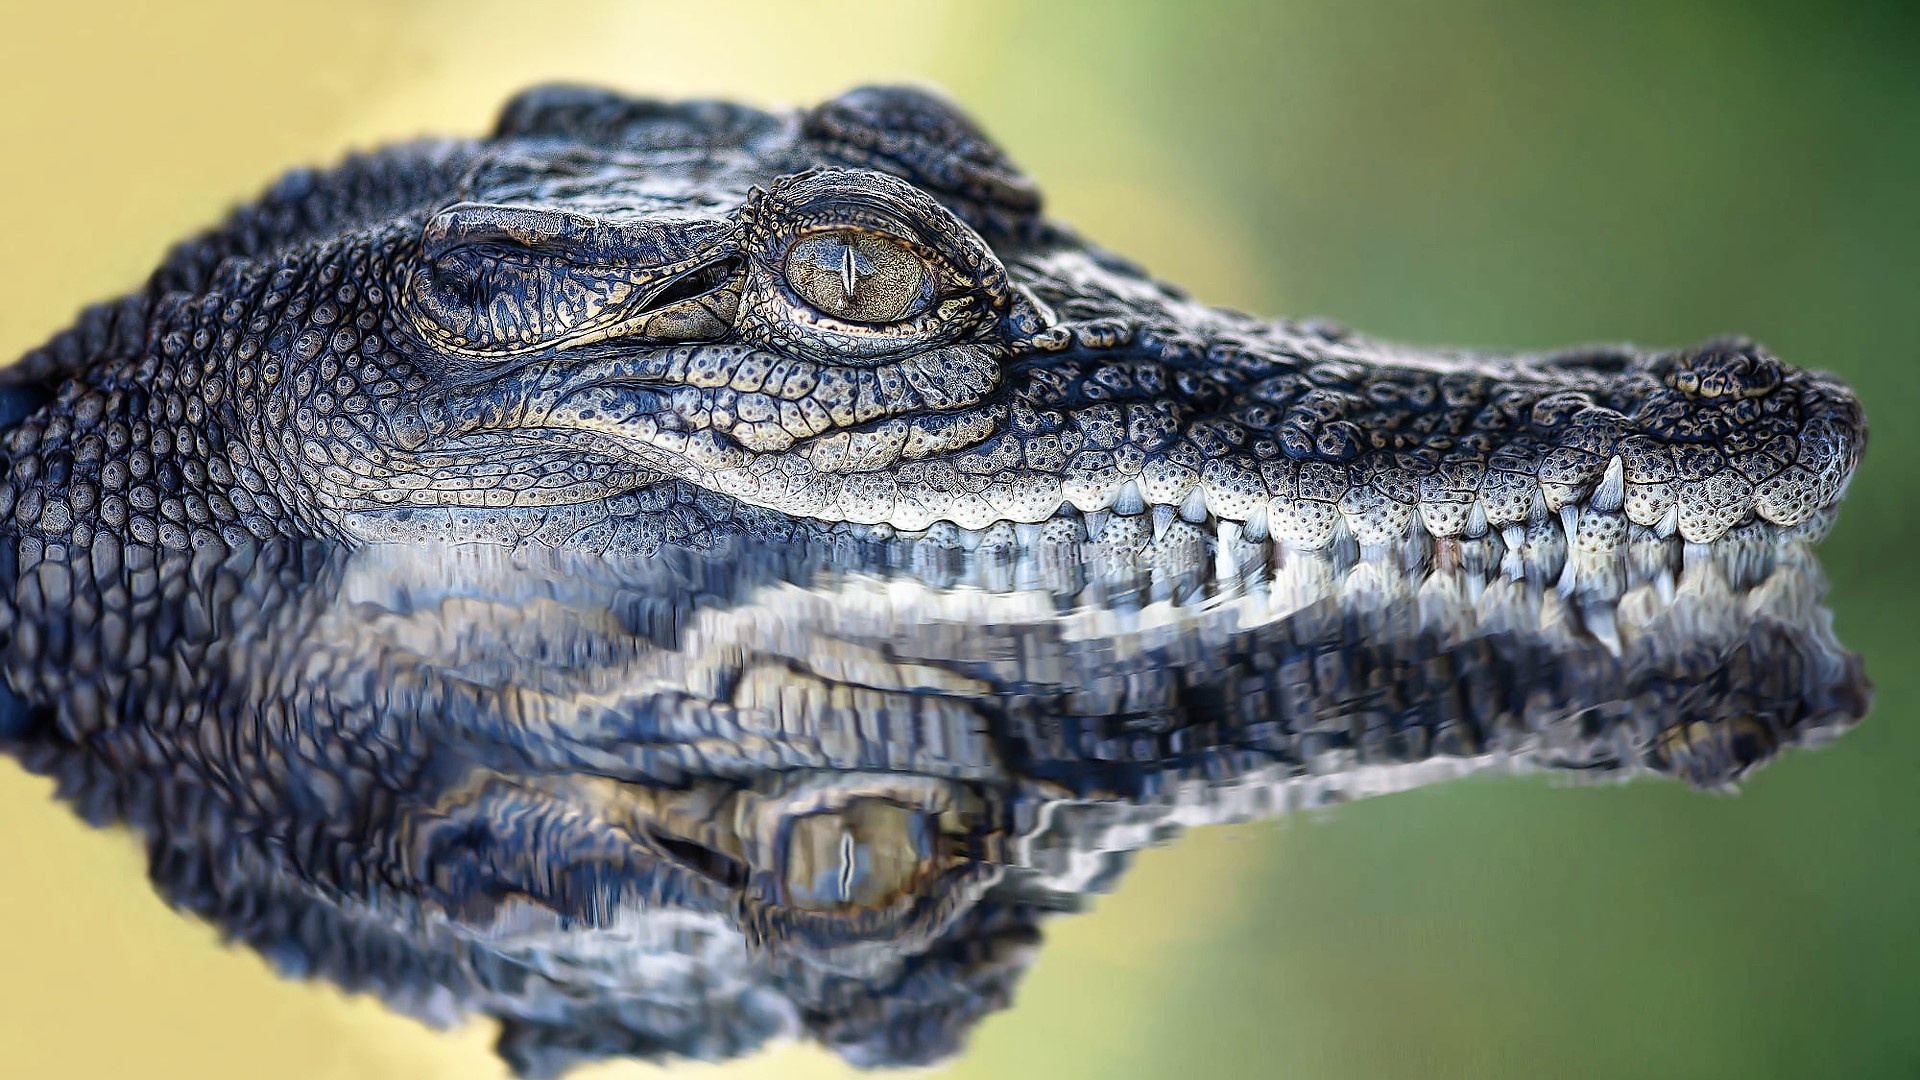 Crocodile: The largest living reptile, Males can grow up to a length of 6 m. 1920x1080 Full HD Wallpaper.